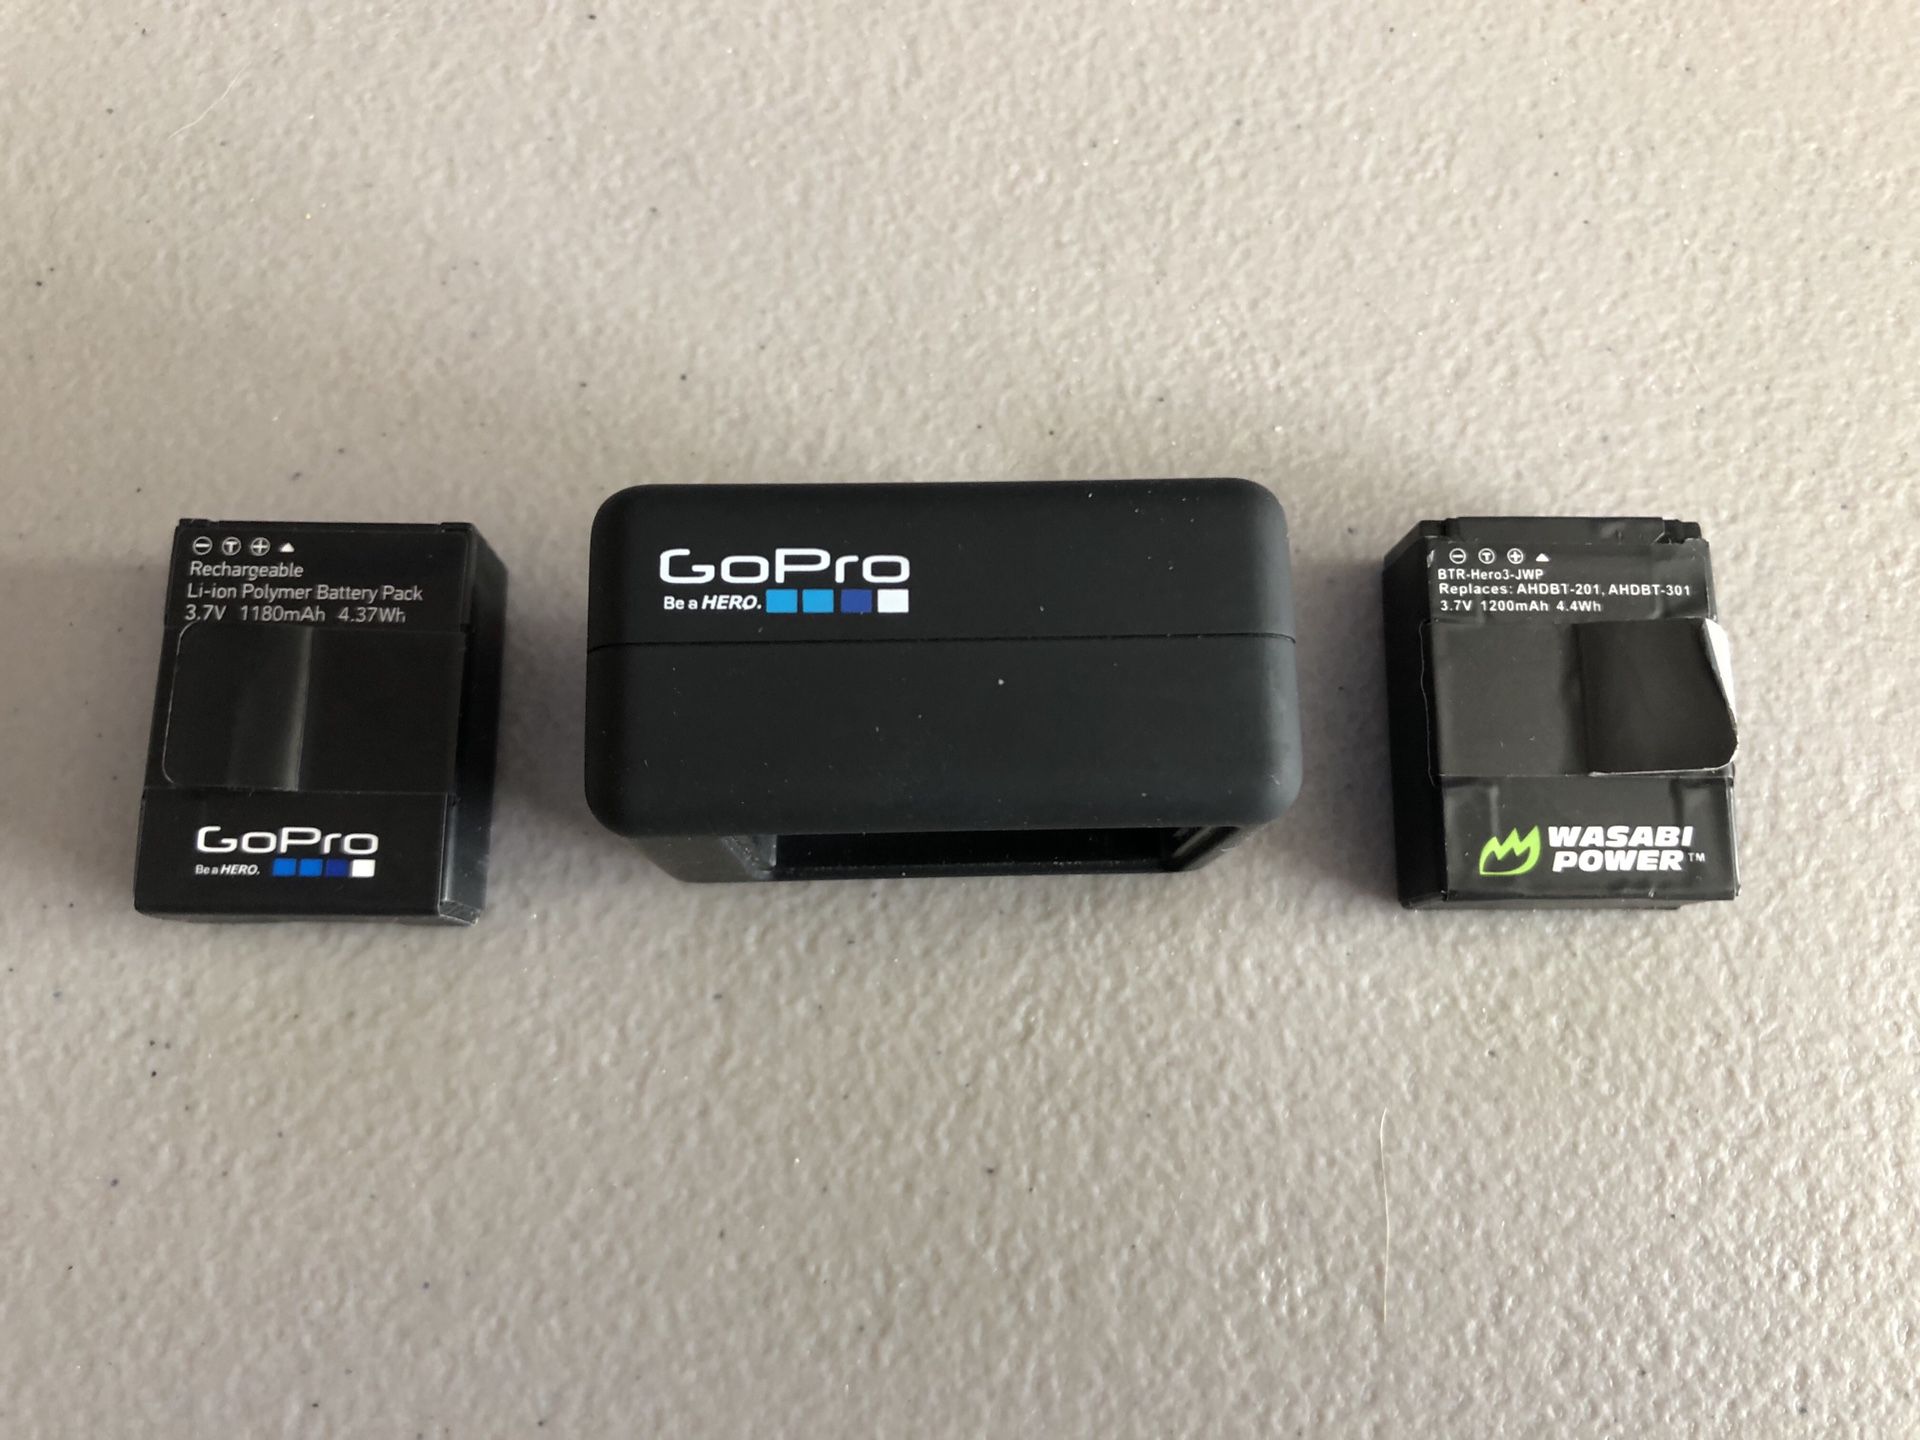 GOPRO 4 Battery Charger and 2 Batteries